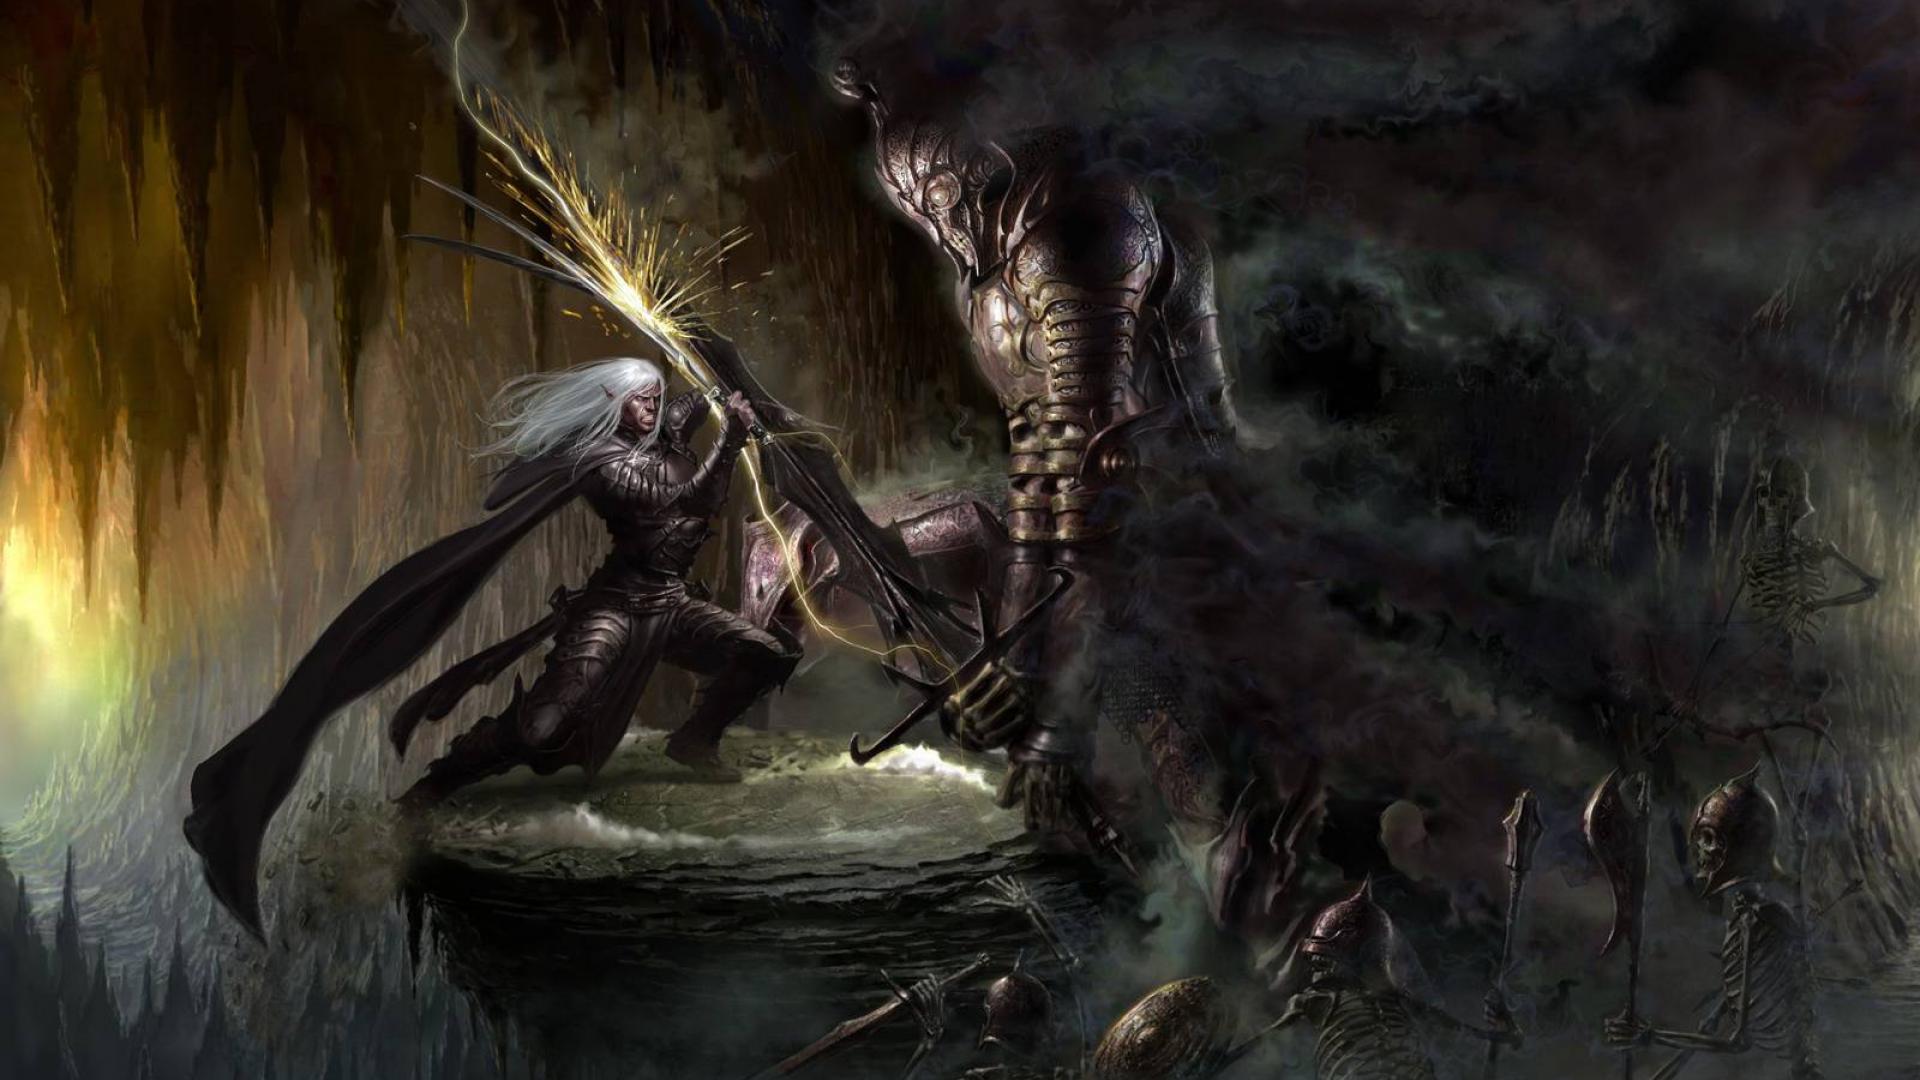 Drizzt The Unholy Warlord By Ilacha Got Any Wallpaper